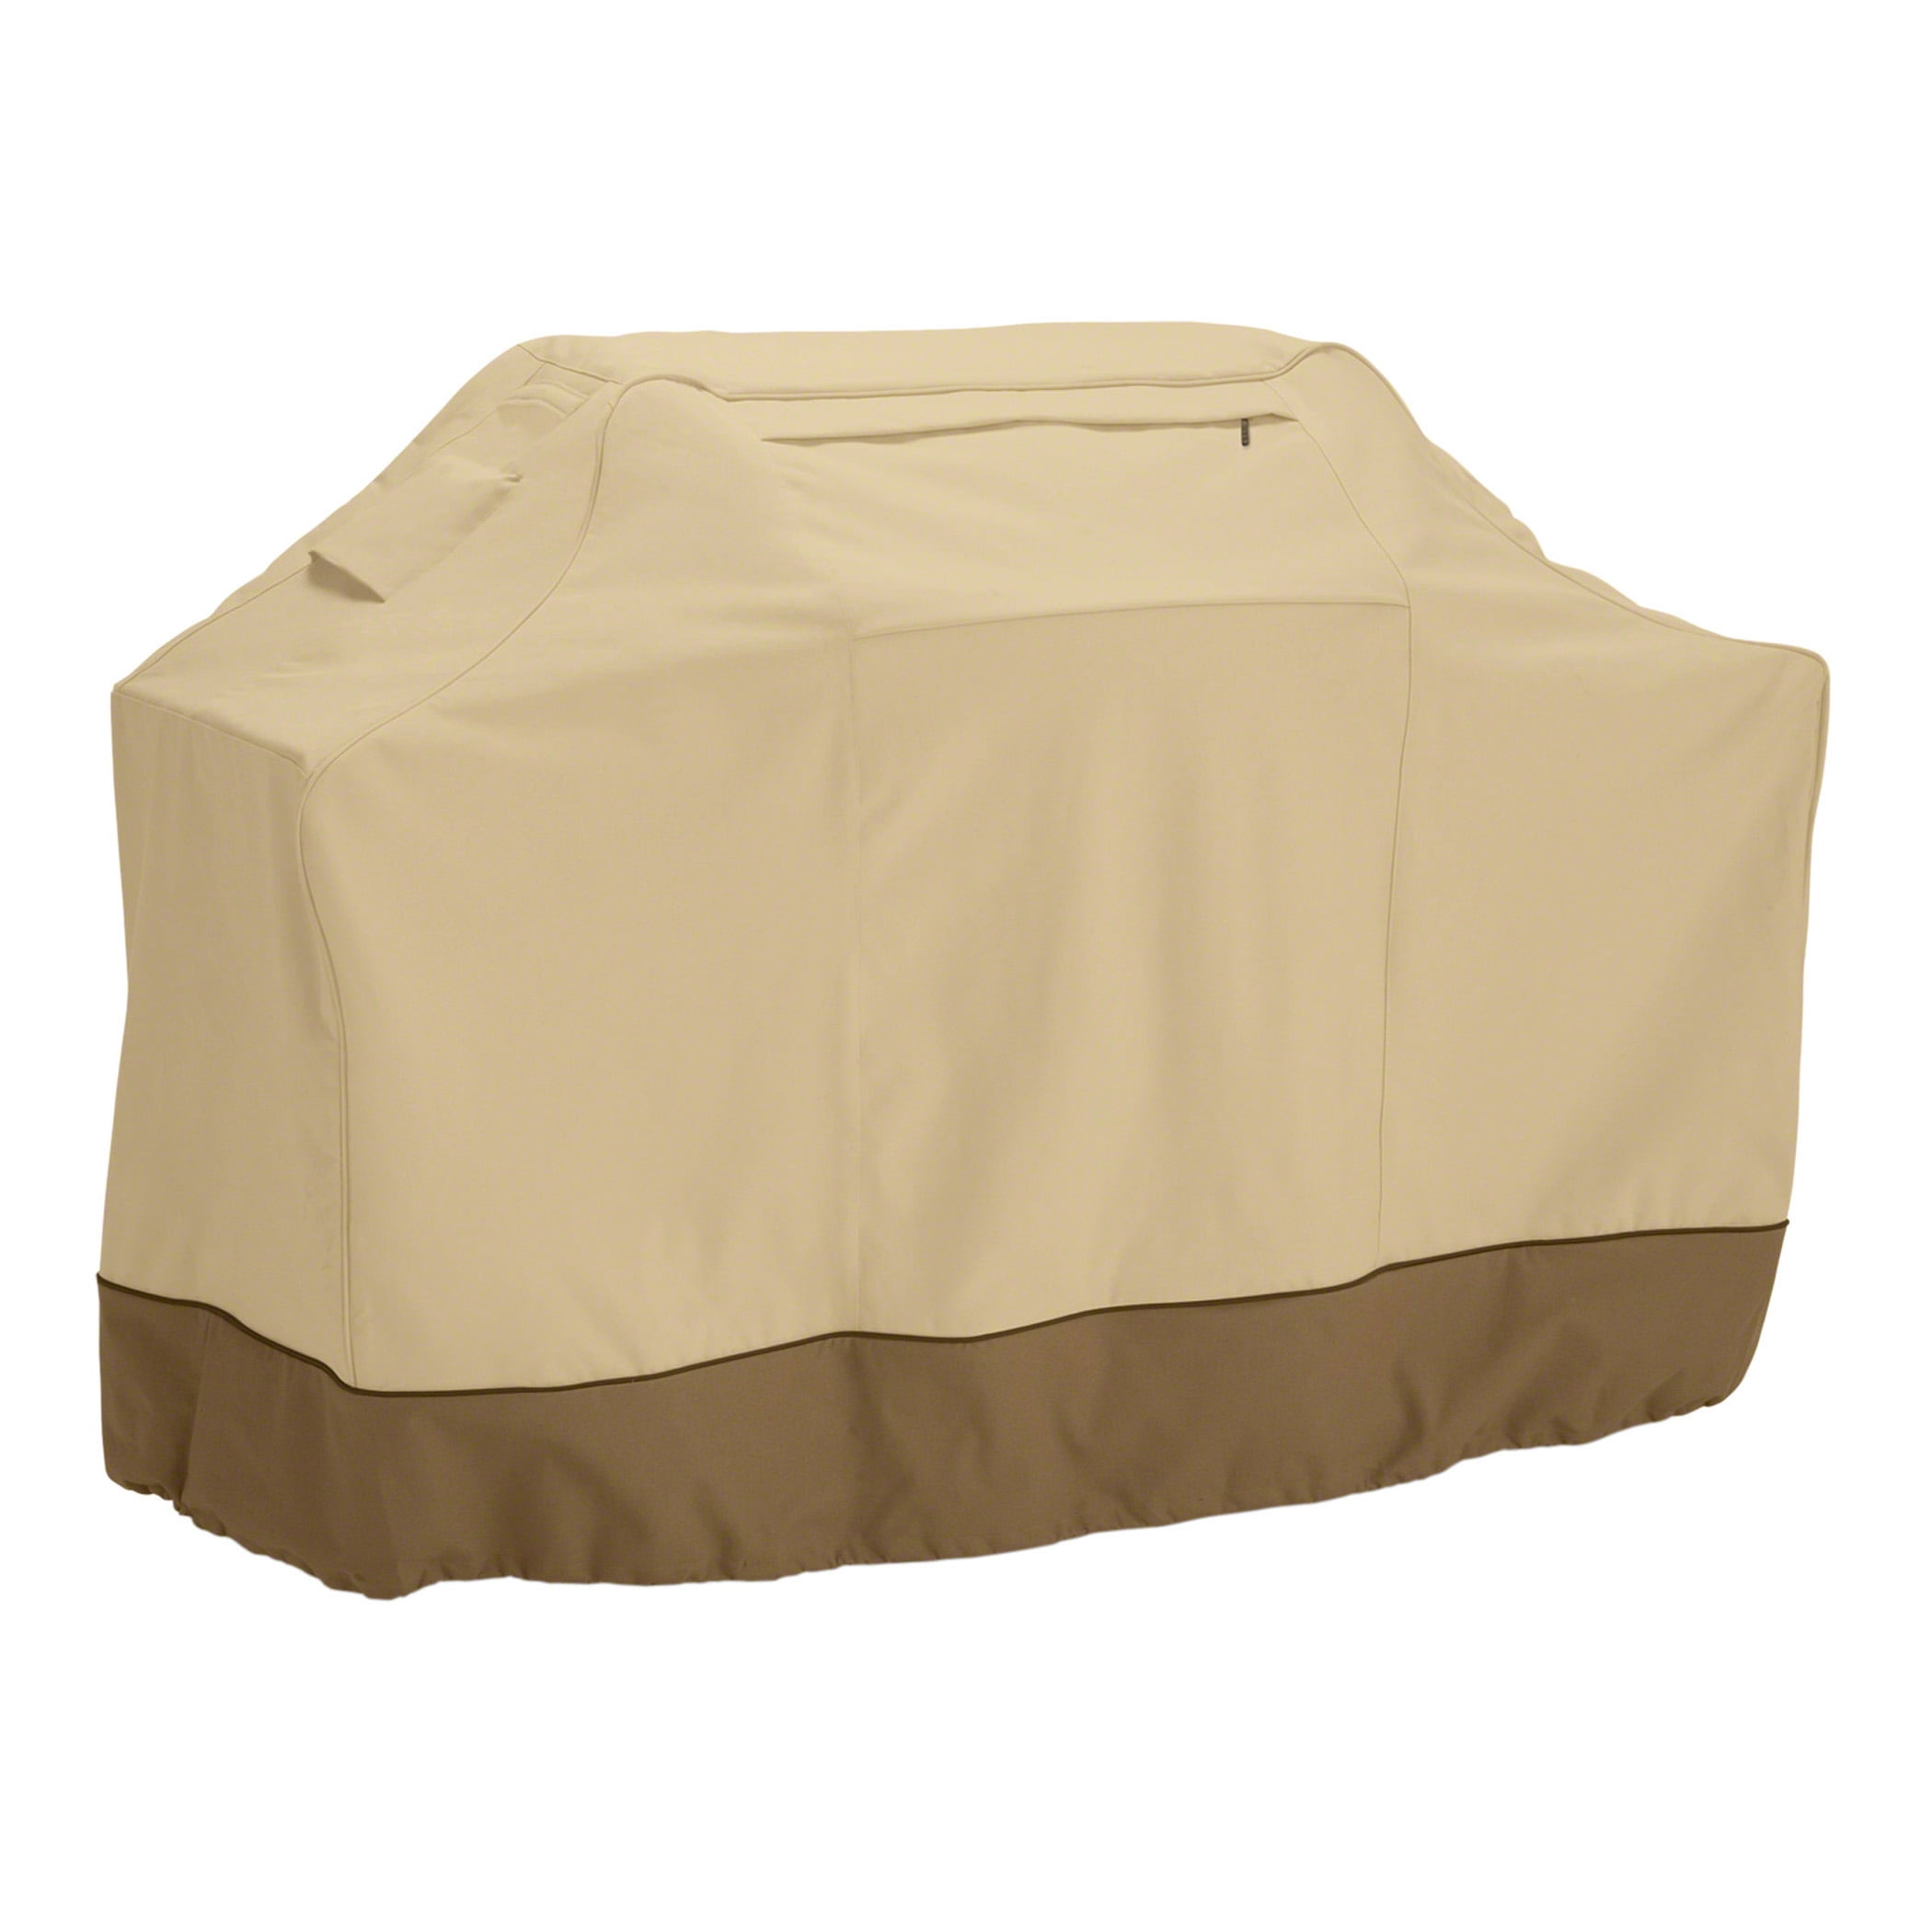 New Pop-up BBQ Grill Cover Fire Retardant Material 60" Includes Carry Case 